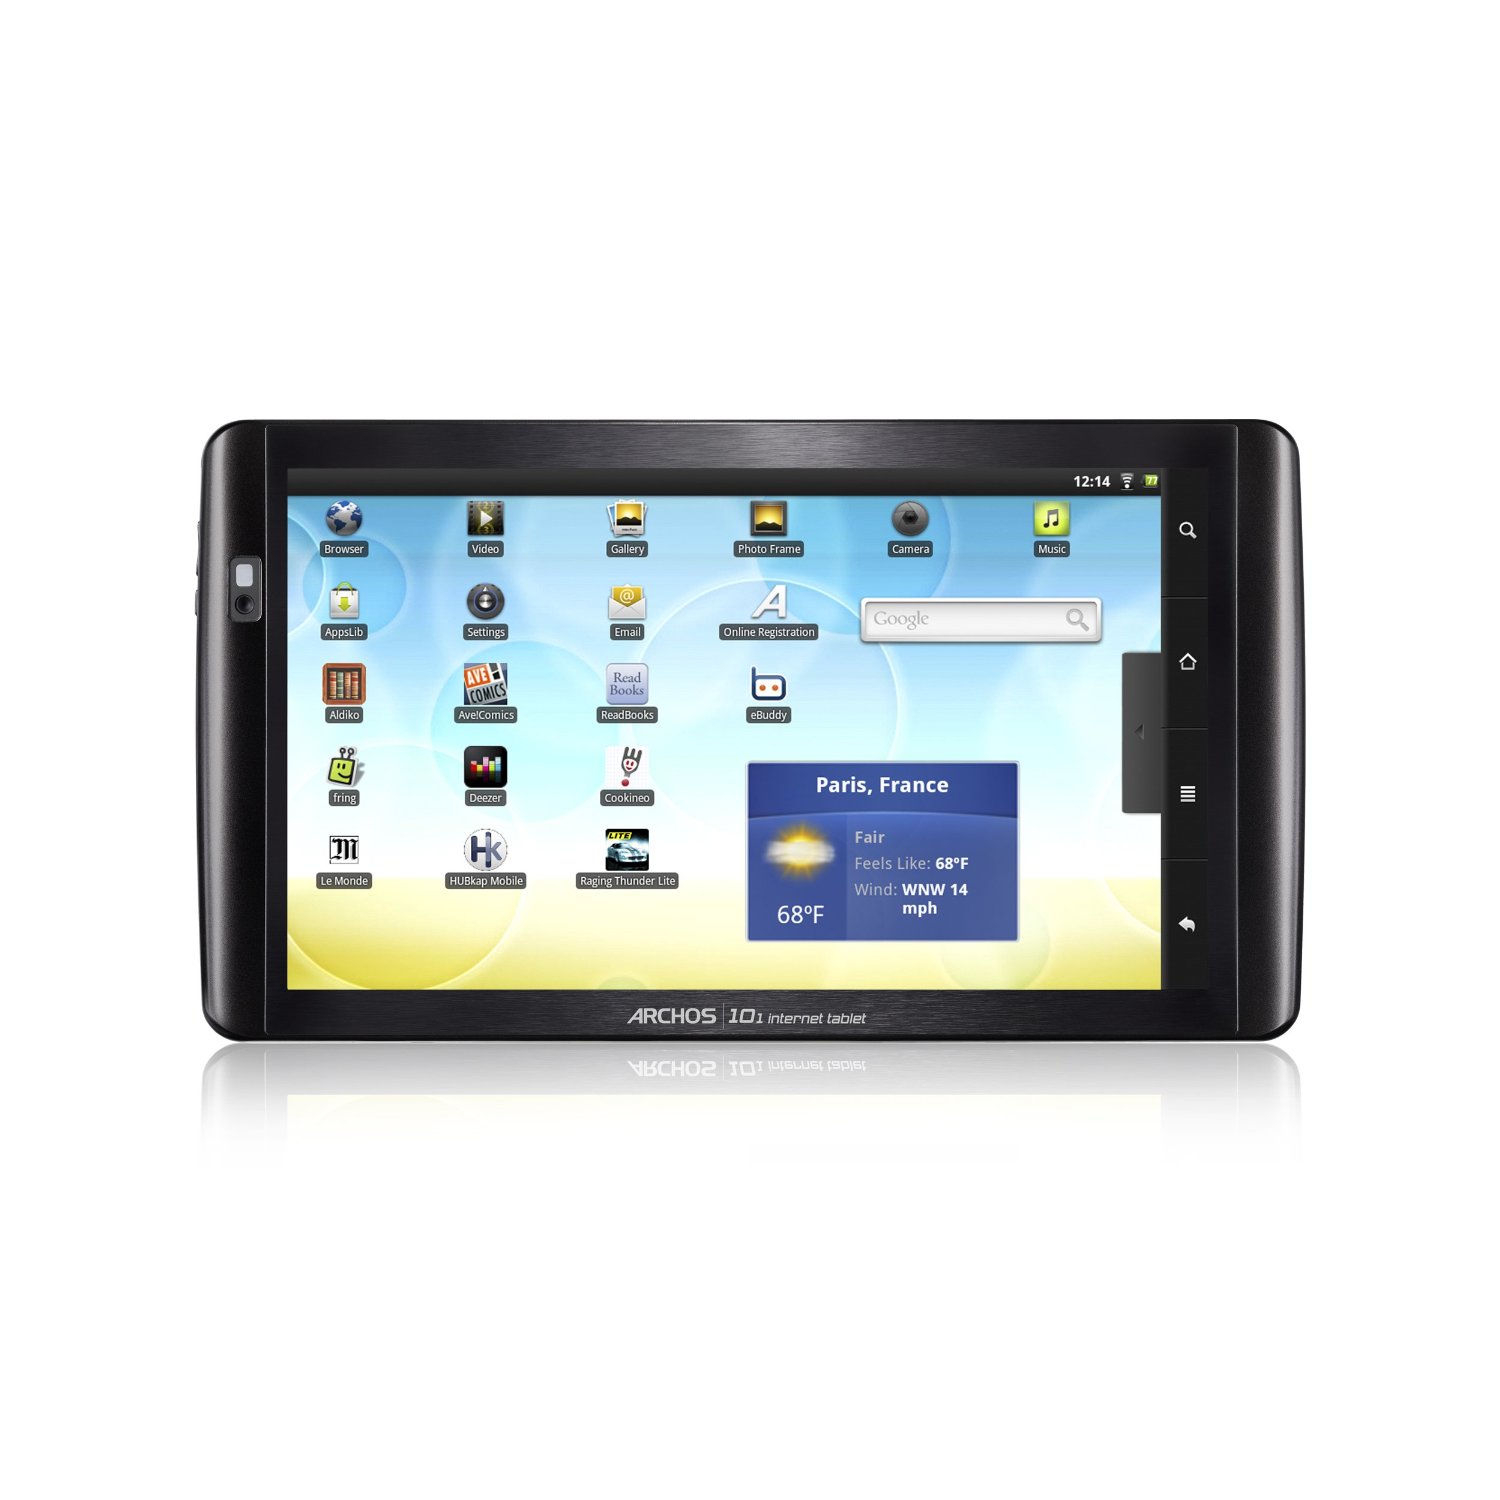 https://thetechjournal.com/wp-content/uploads/images/1110/1318017670-archos-101-android-powered-internet-tablet-1.jpg